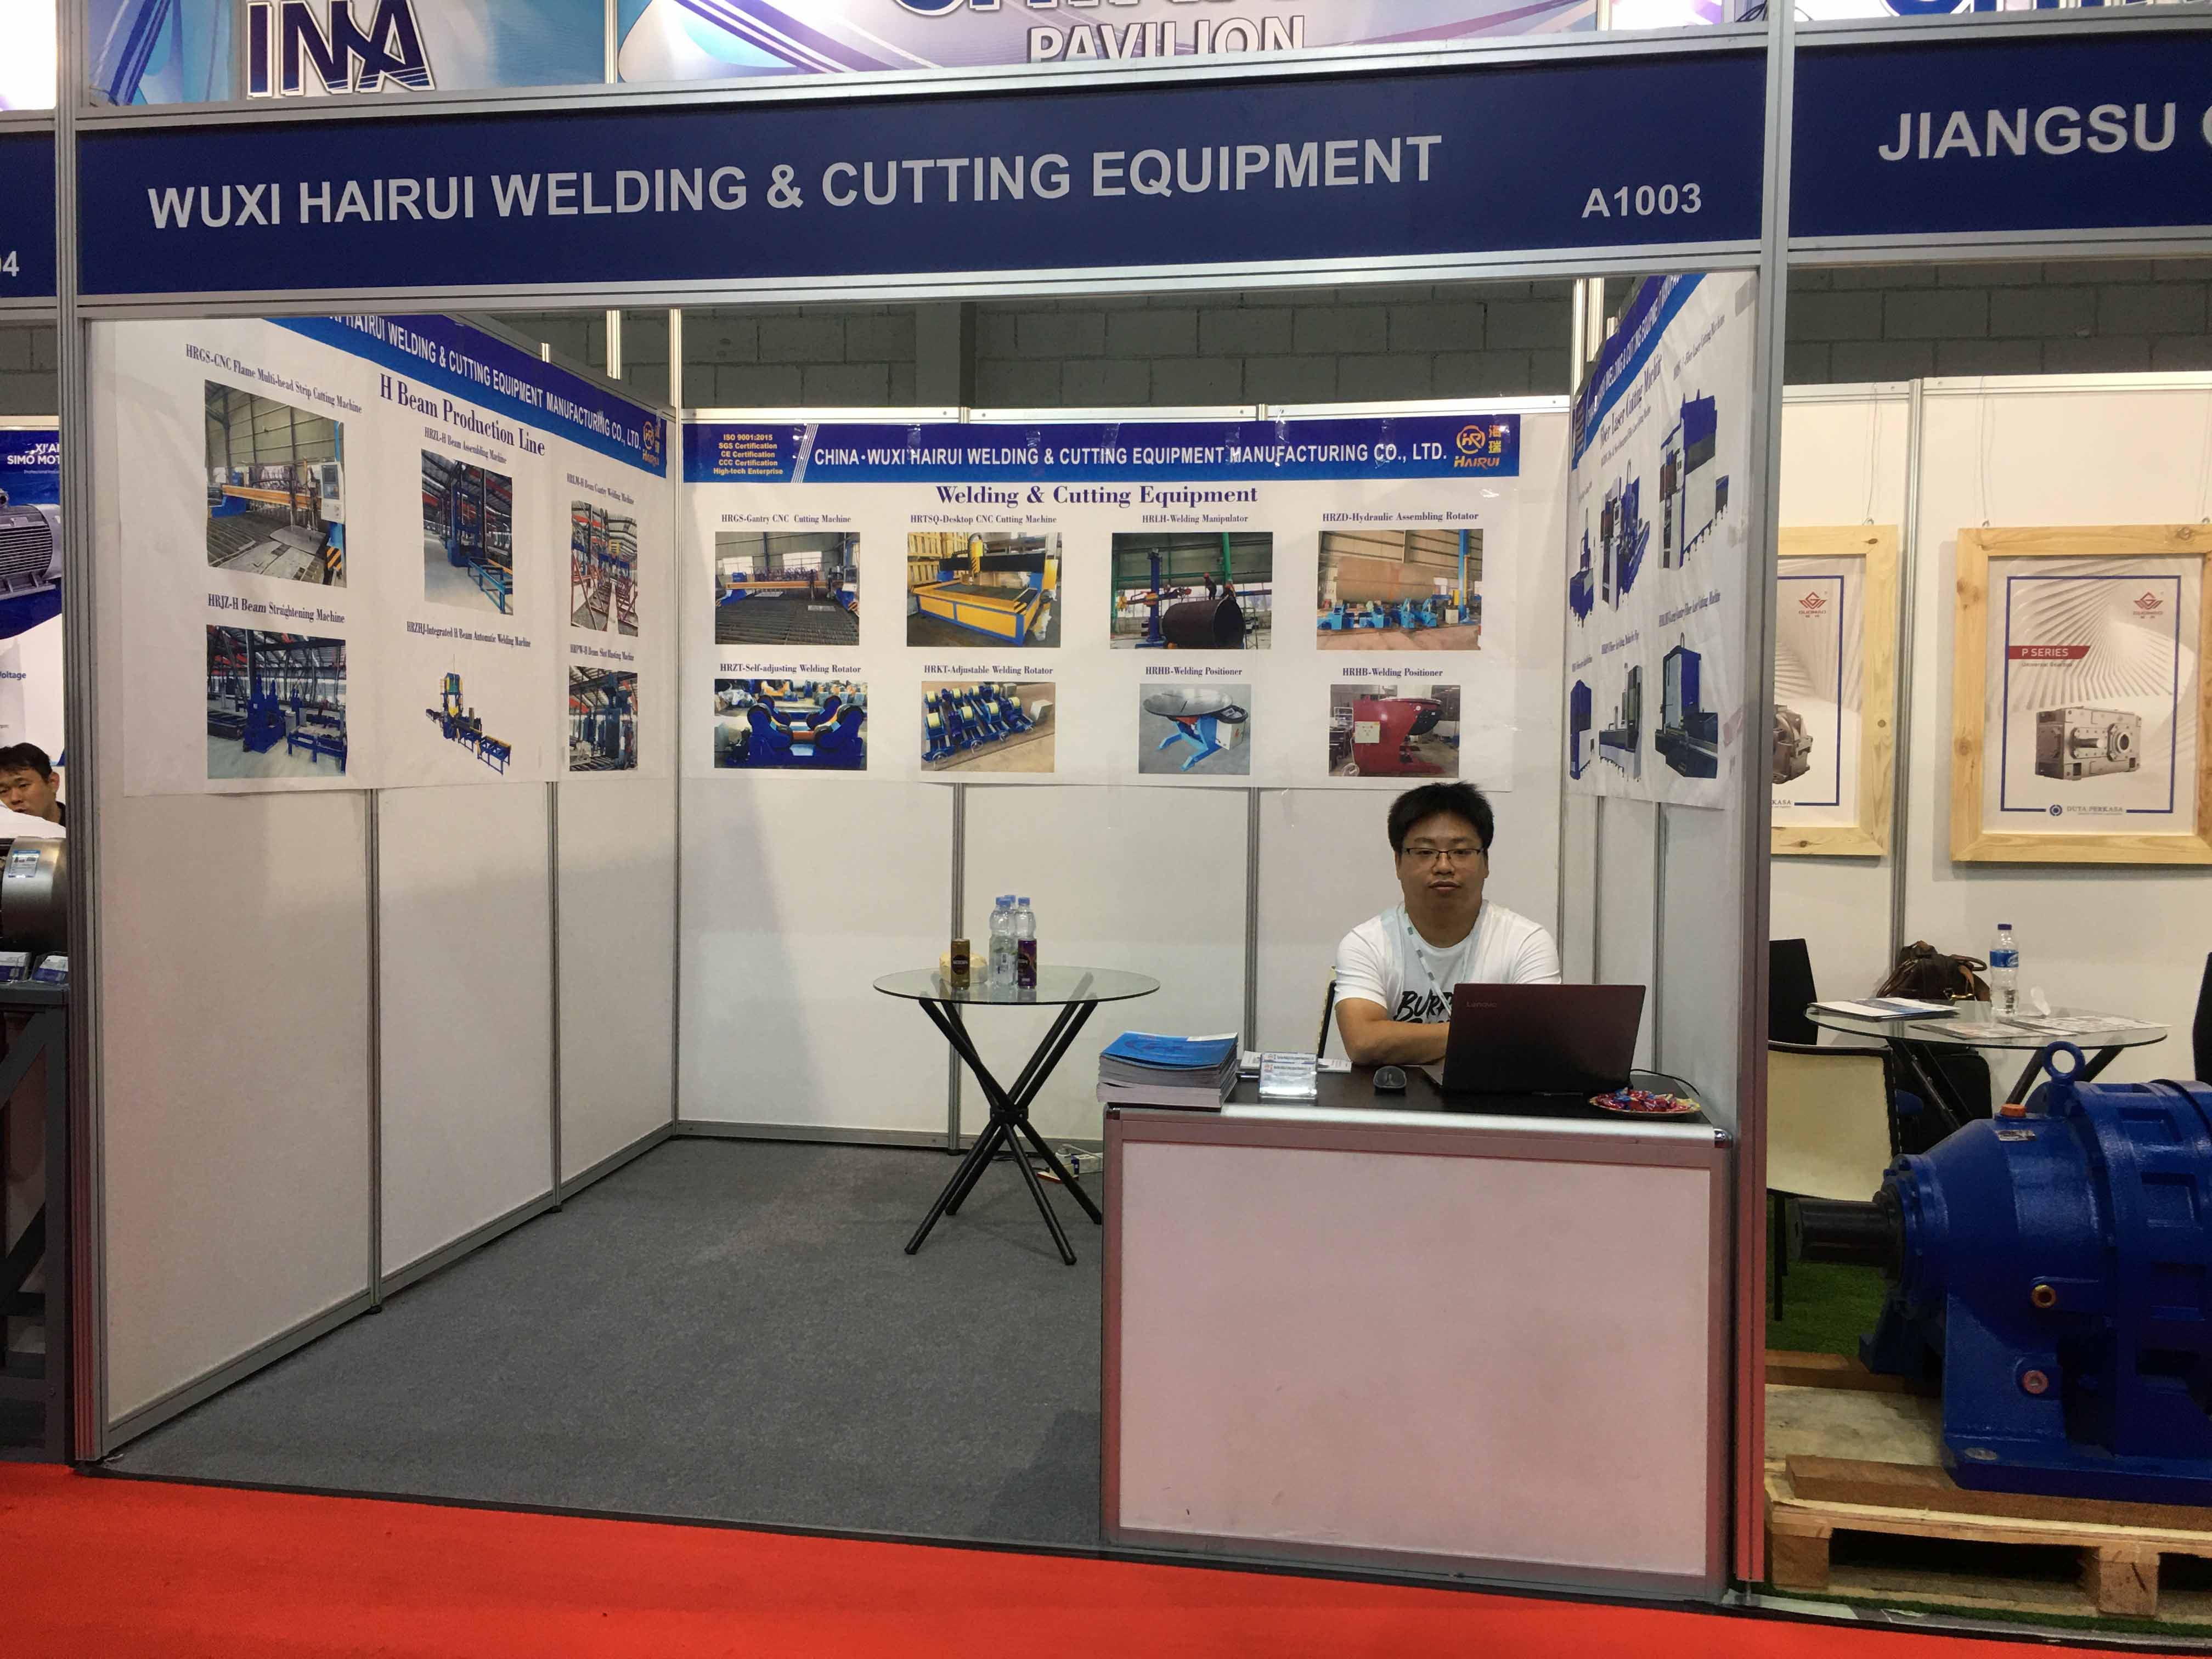 Jakarta, Indonesia-International Manufacturing, Machinery, Equipment, Materials & Services Exhibitions, December 2019